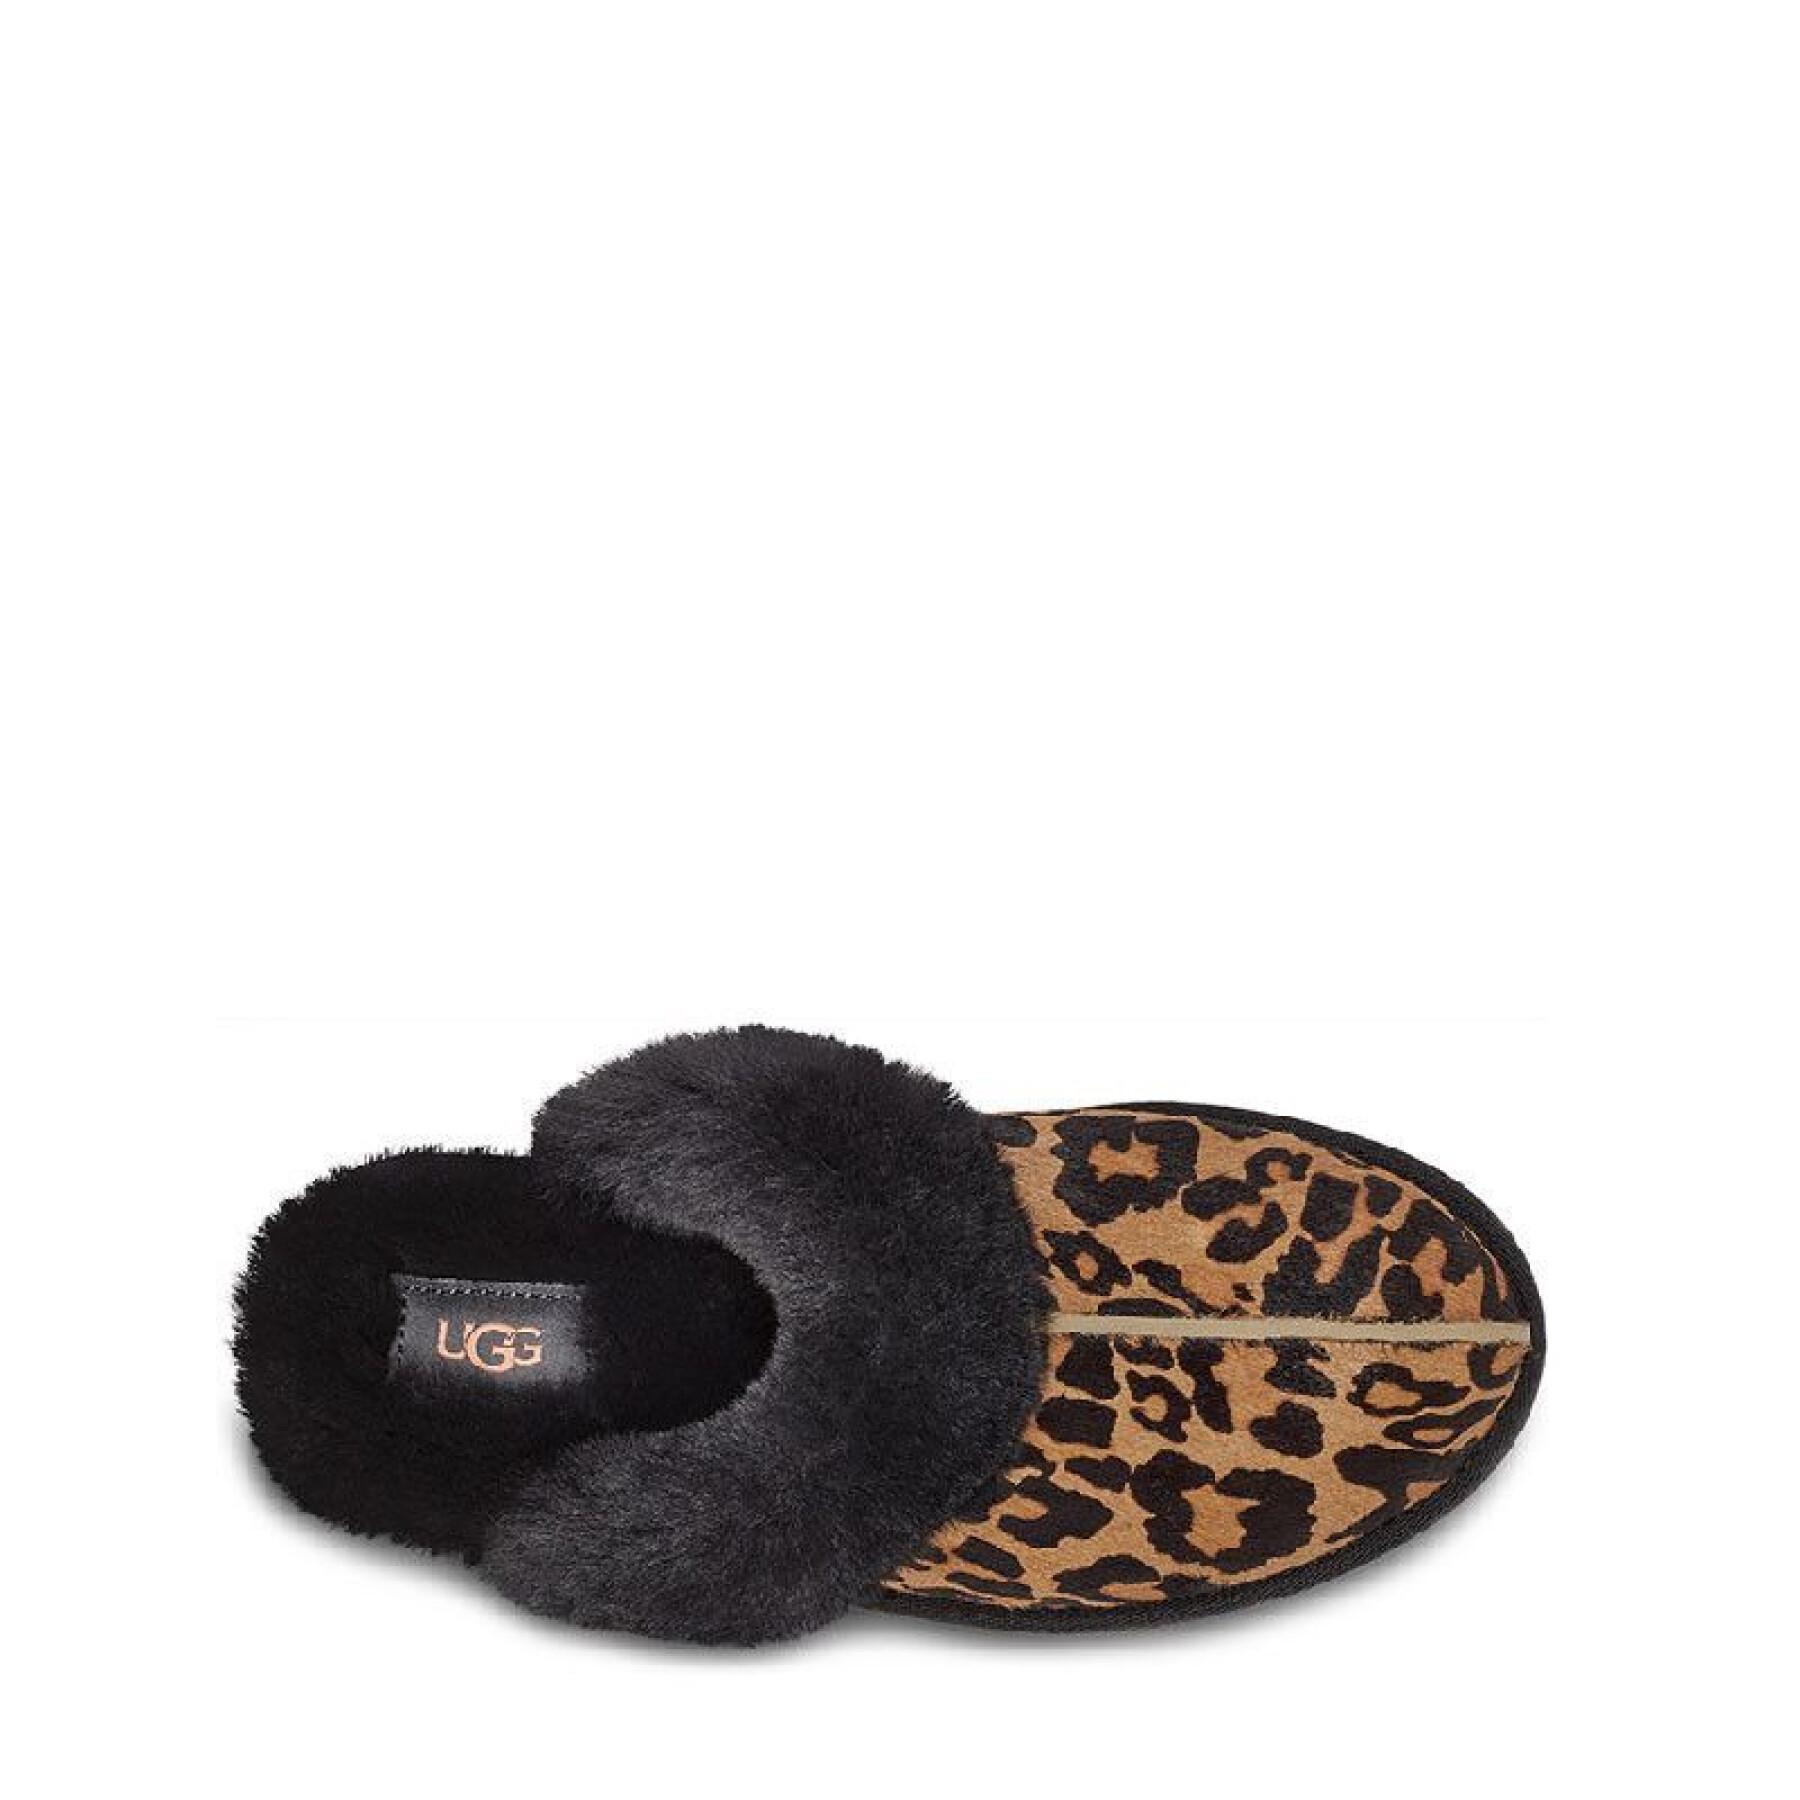 Women's slippers Ugg Scuffette Ii Panther Print